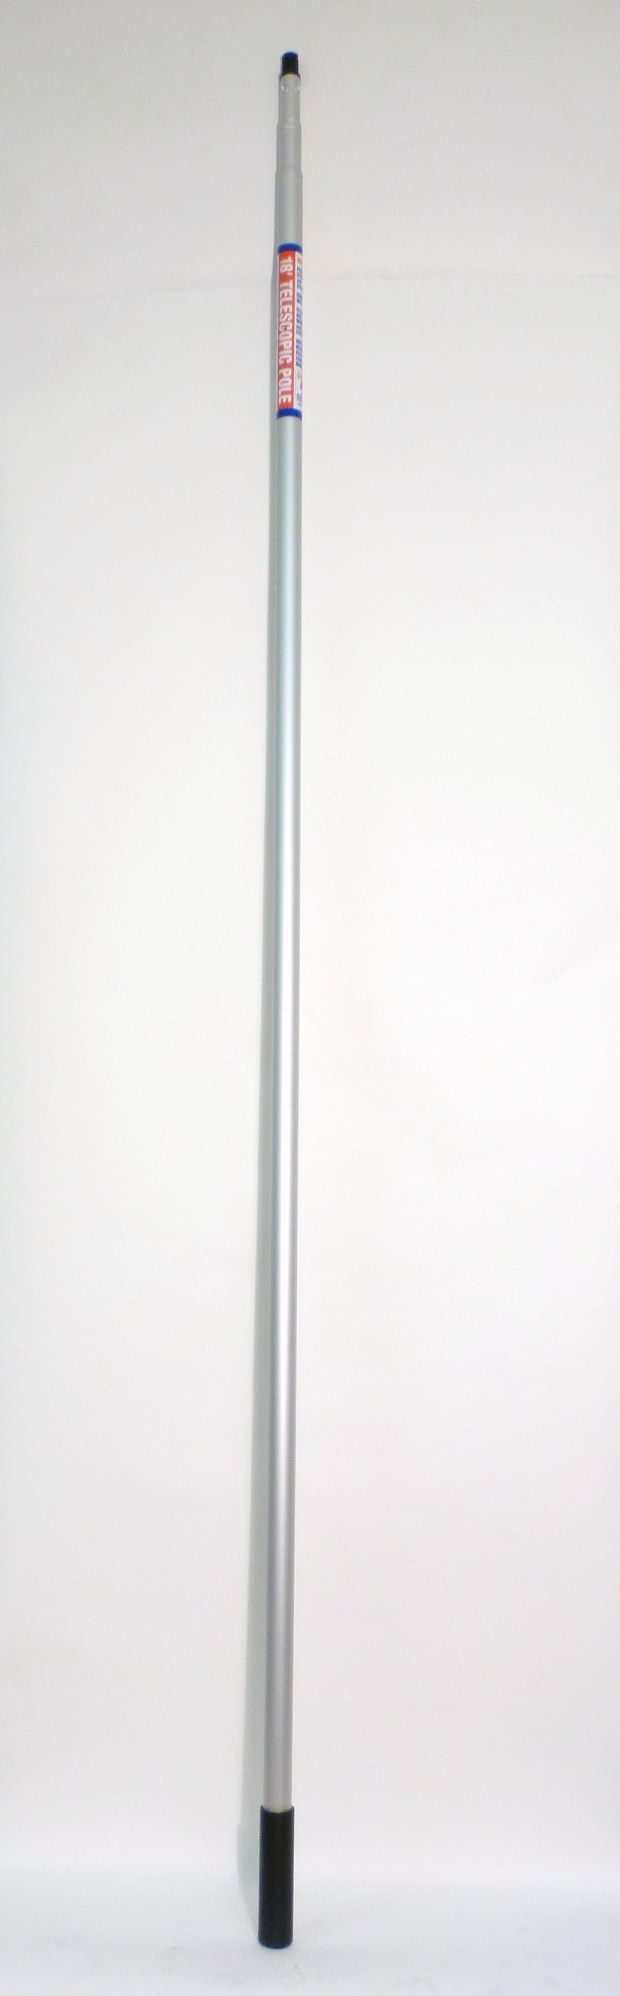 3 SECT TELESCOPIC 18FT. POLE WITH ACME